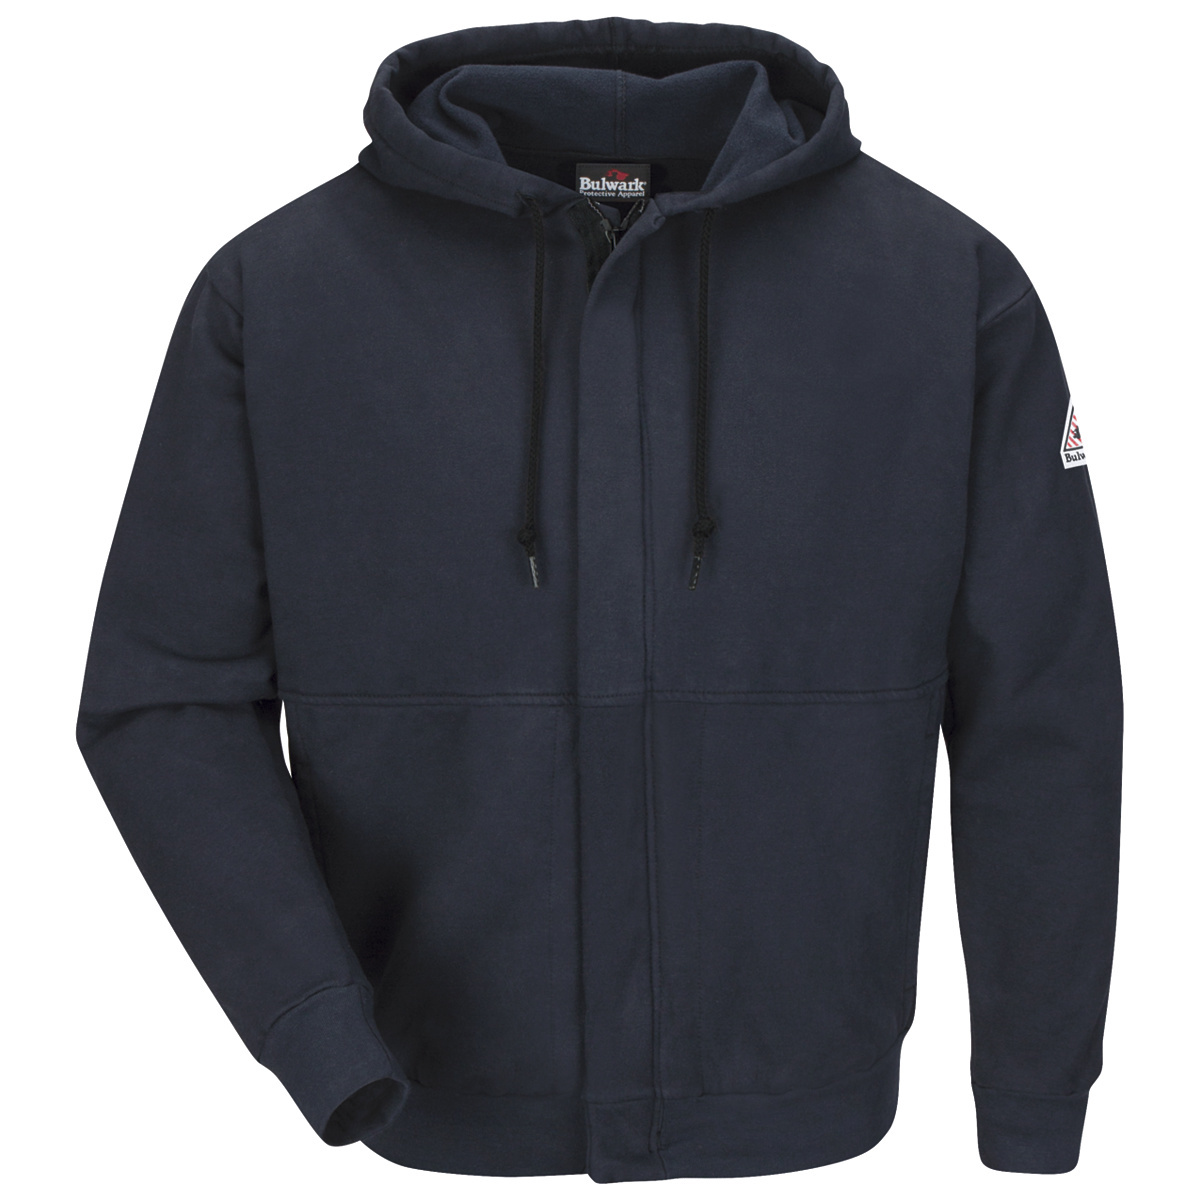 Bulwark® Small| Regular Navy Blue Cotton/Spandex Brushed Fleece Flame Resistant Hooded Sweatshirt With Zipper Front Closure